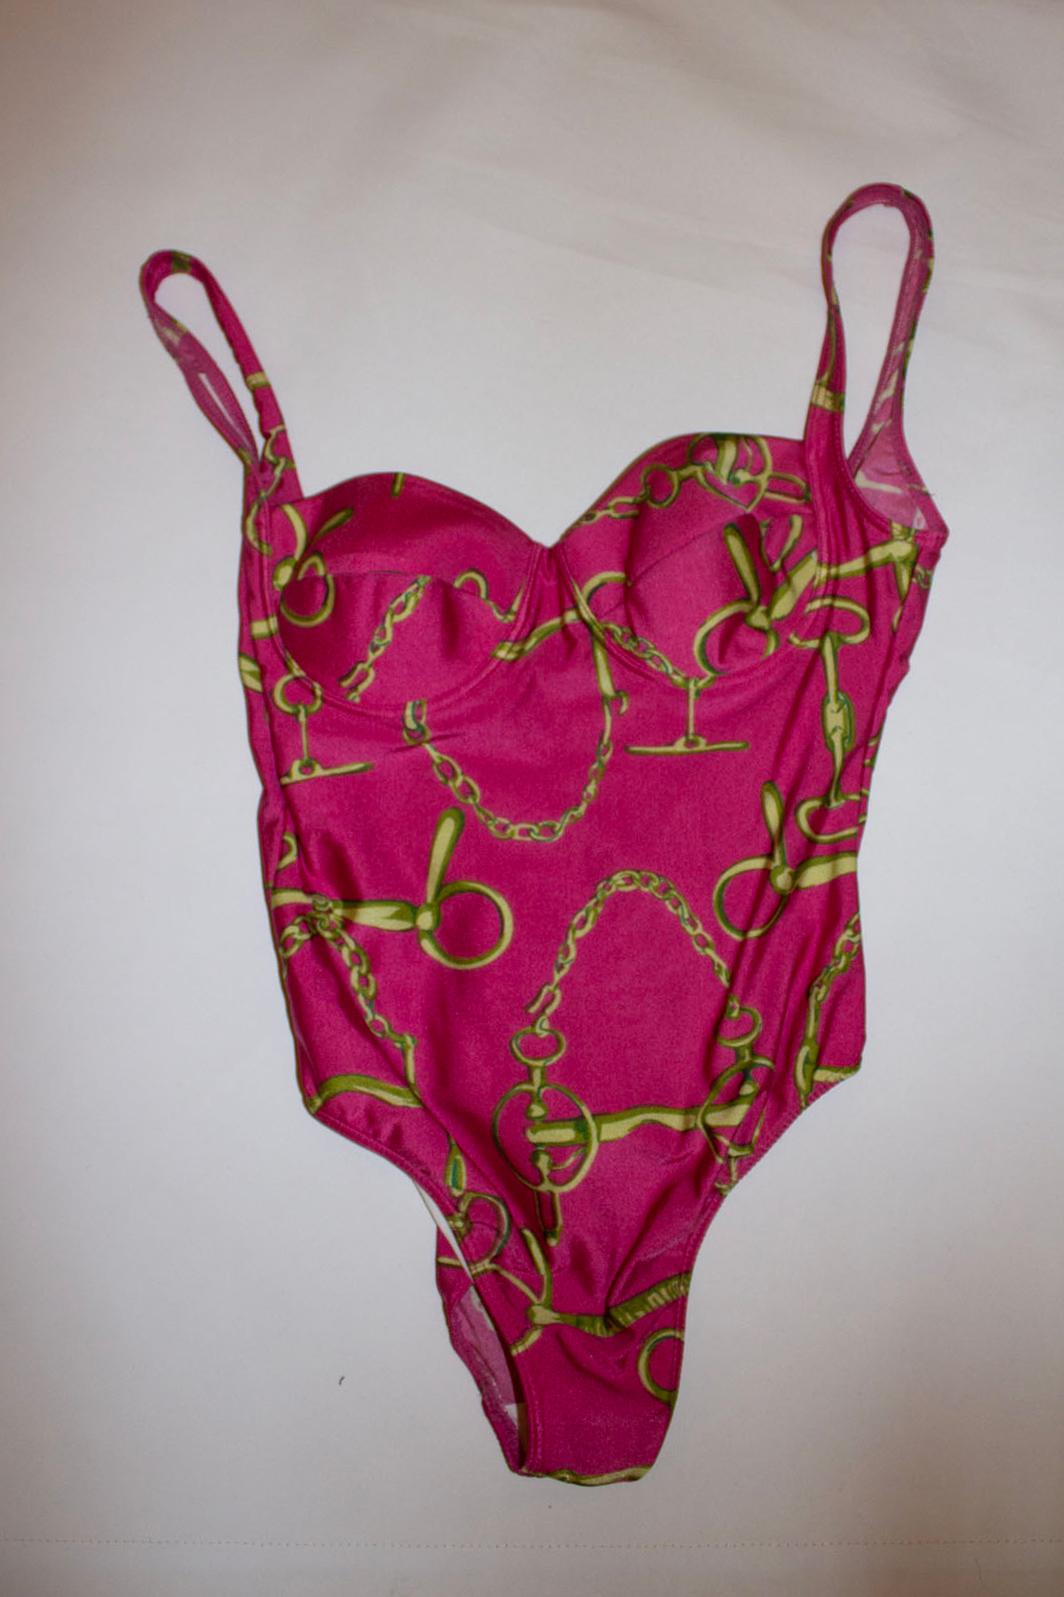 A headturning vintage swimsuit by Gucci. In a pretty pink and gold print, the swim suit has built in bust cups.
Size M Made in Brazil. Measurements Bust up to 38'', length 27''